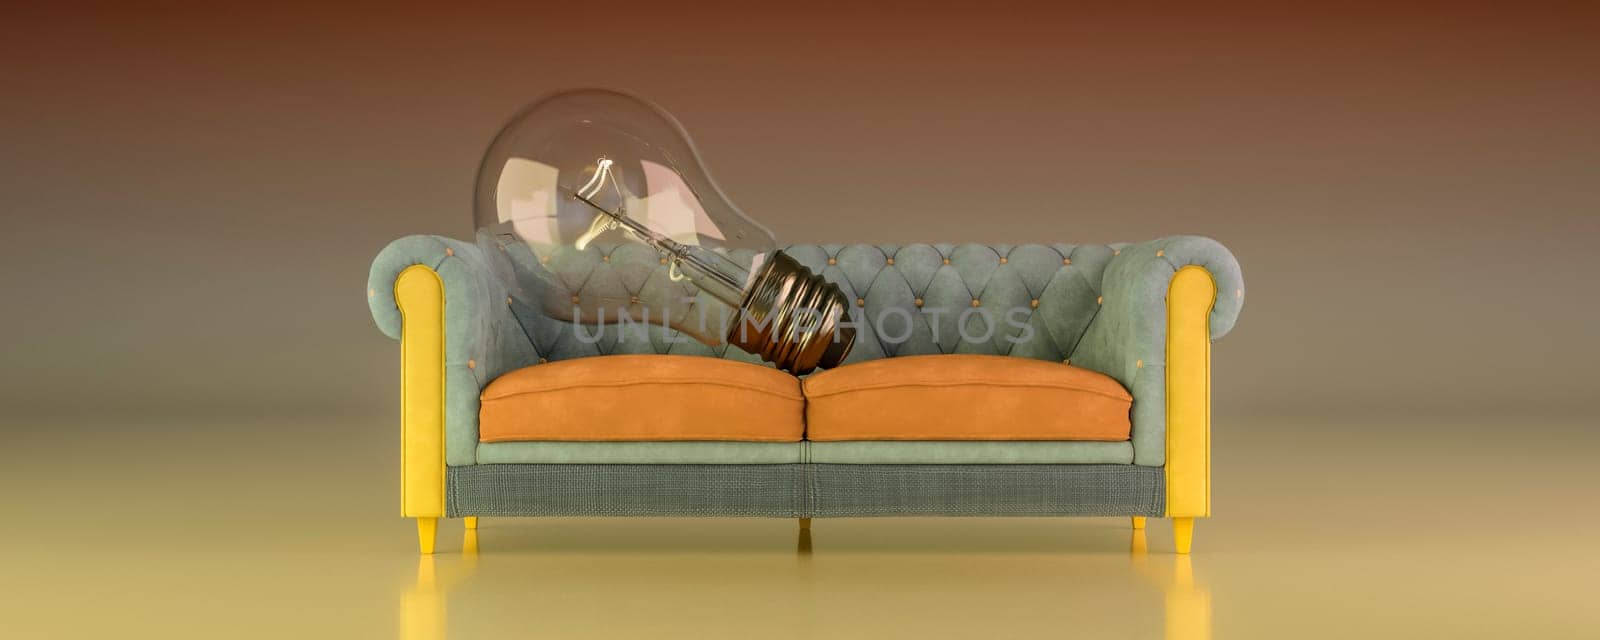 An imaginative visual metaphor blending comfort with enlightenment, as a giant lightbulb rests on a tufted sofa.